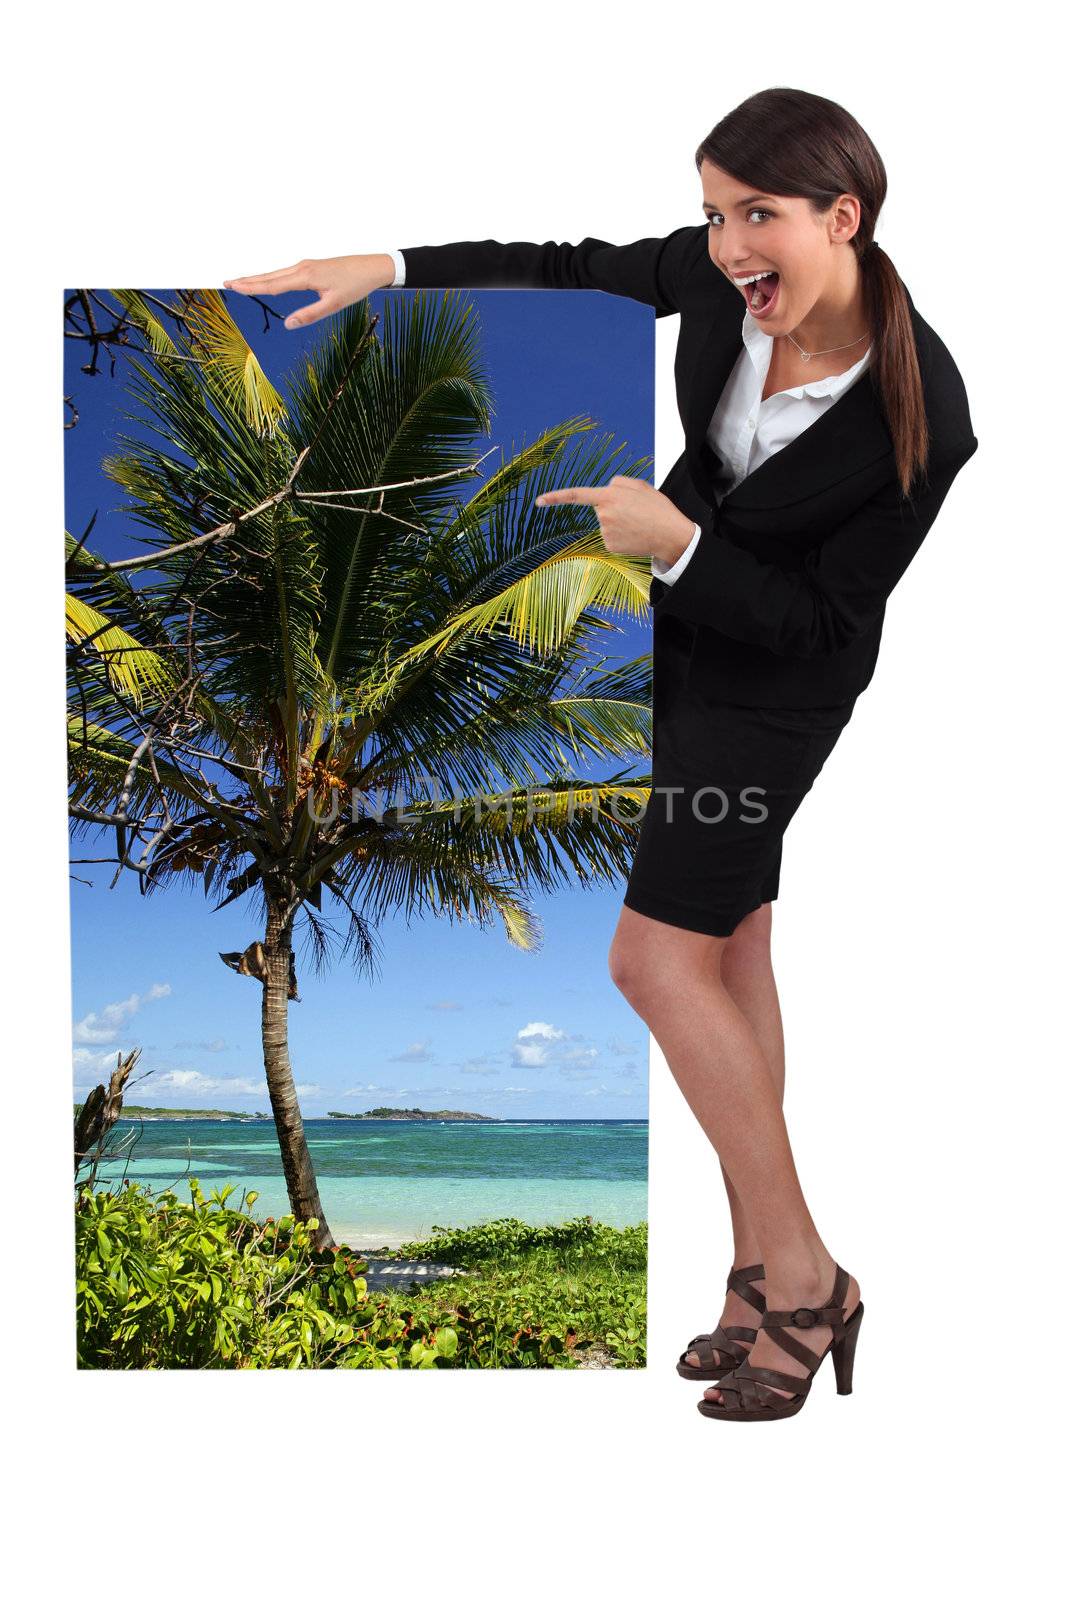 female travel agent showing poster of tropical beach